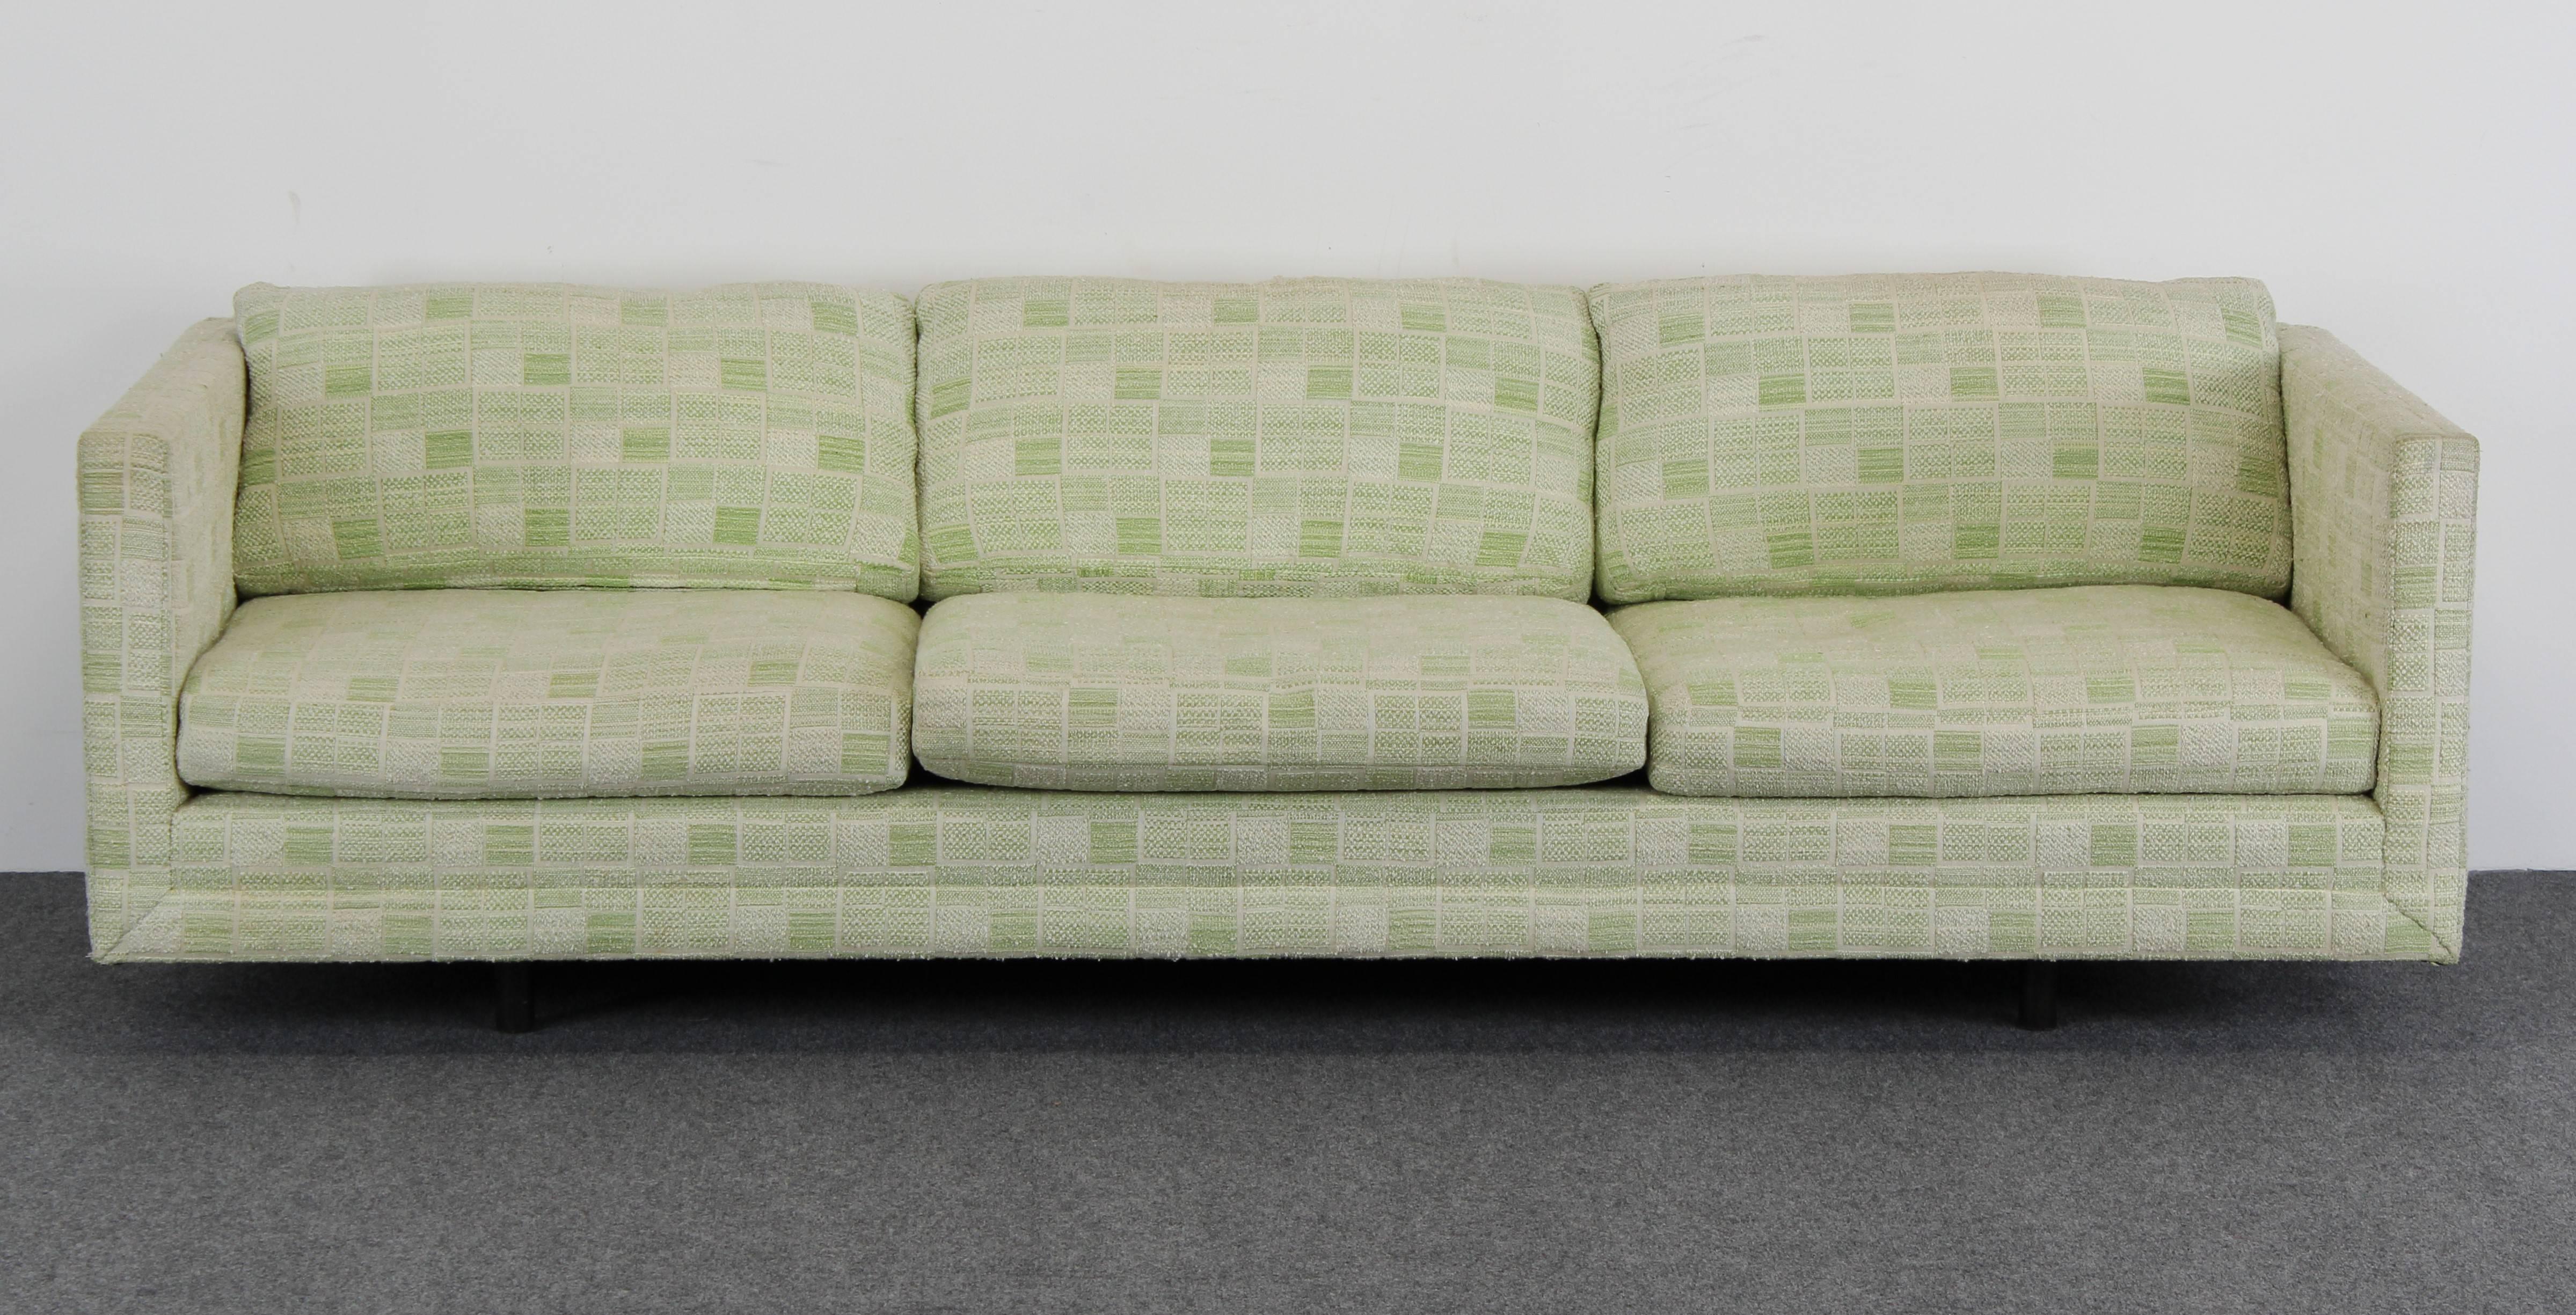 A three-seat Tuxedo sofa, circa 1960s by Harvey Probber. Original green fabric labeled Harvey Probber. The sofa rests on four wood dowel legs. Fabric shows signs of wear. New upholstery recommended. Measures: Seat height is 15